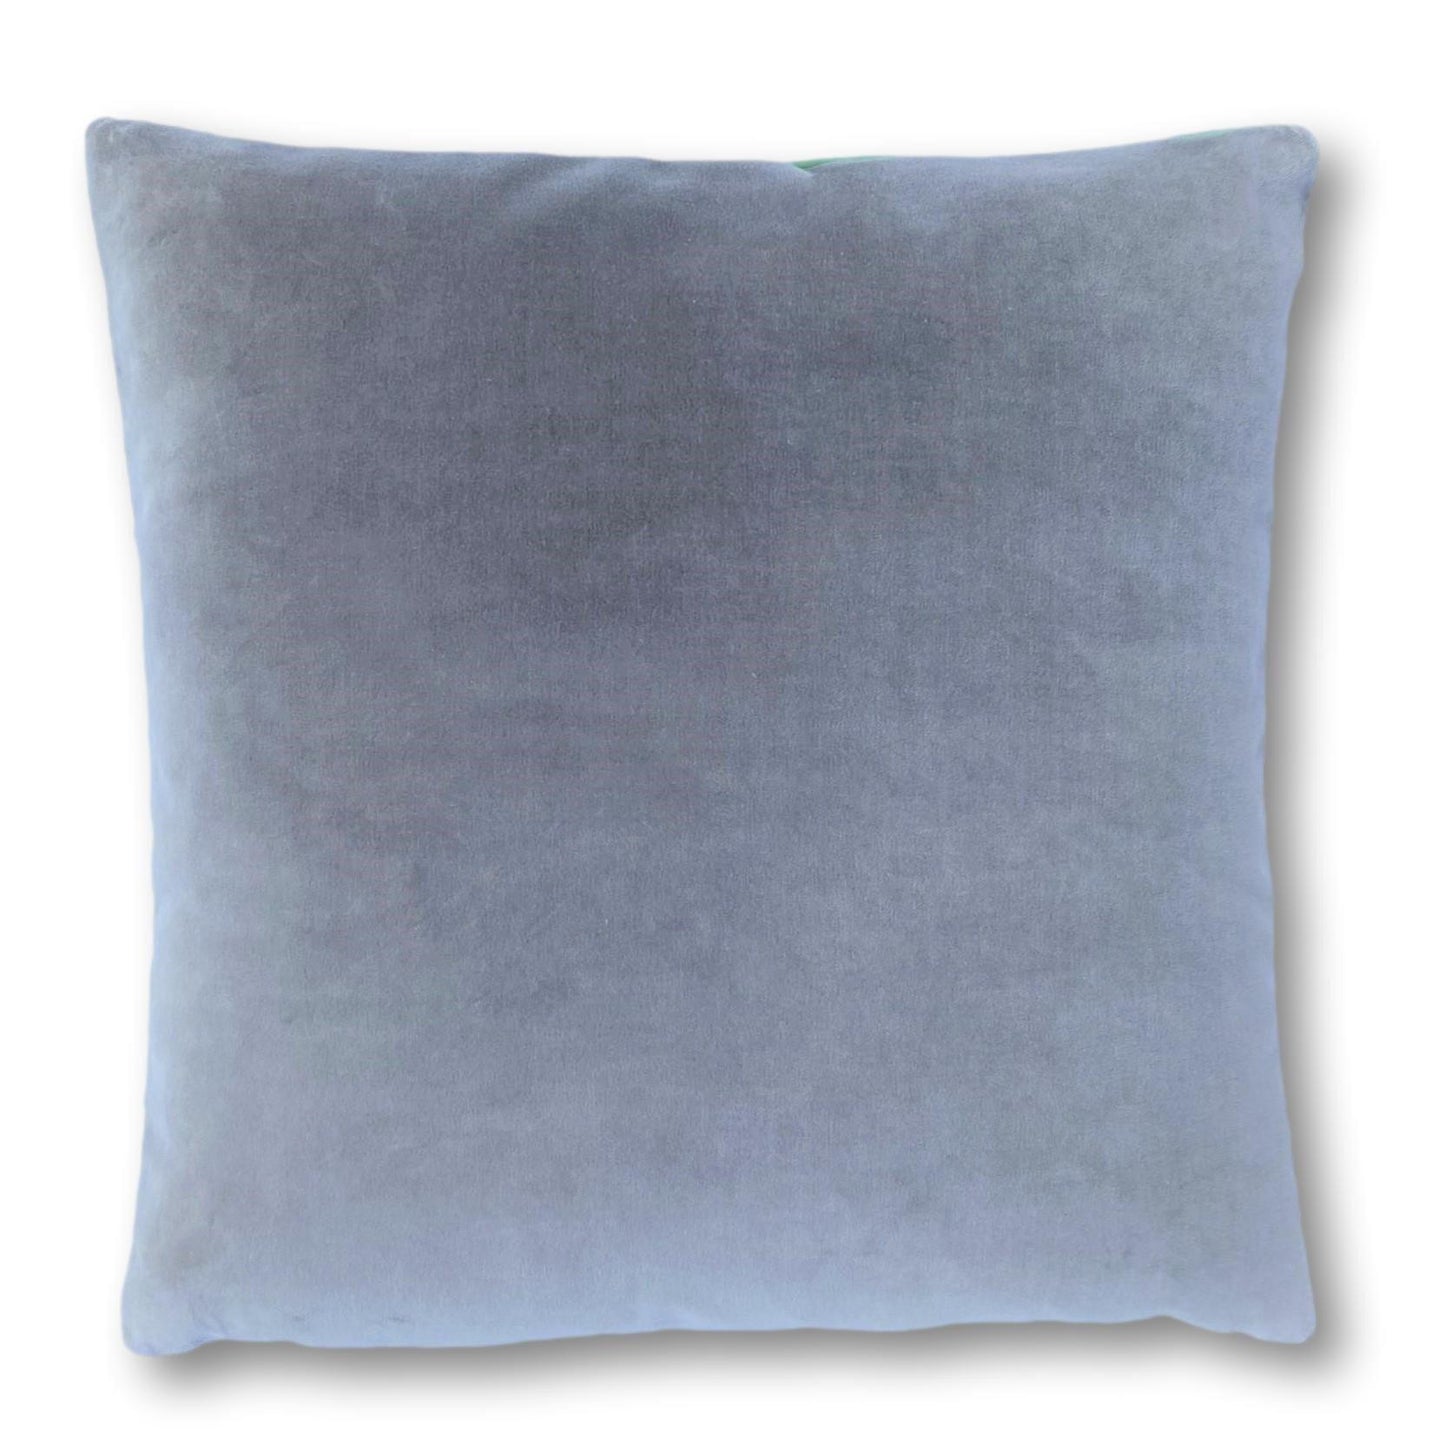 Teal Velvet Cushion Cover with Silver Grey